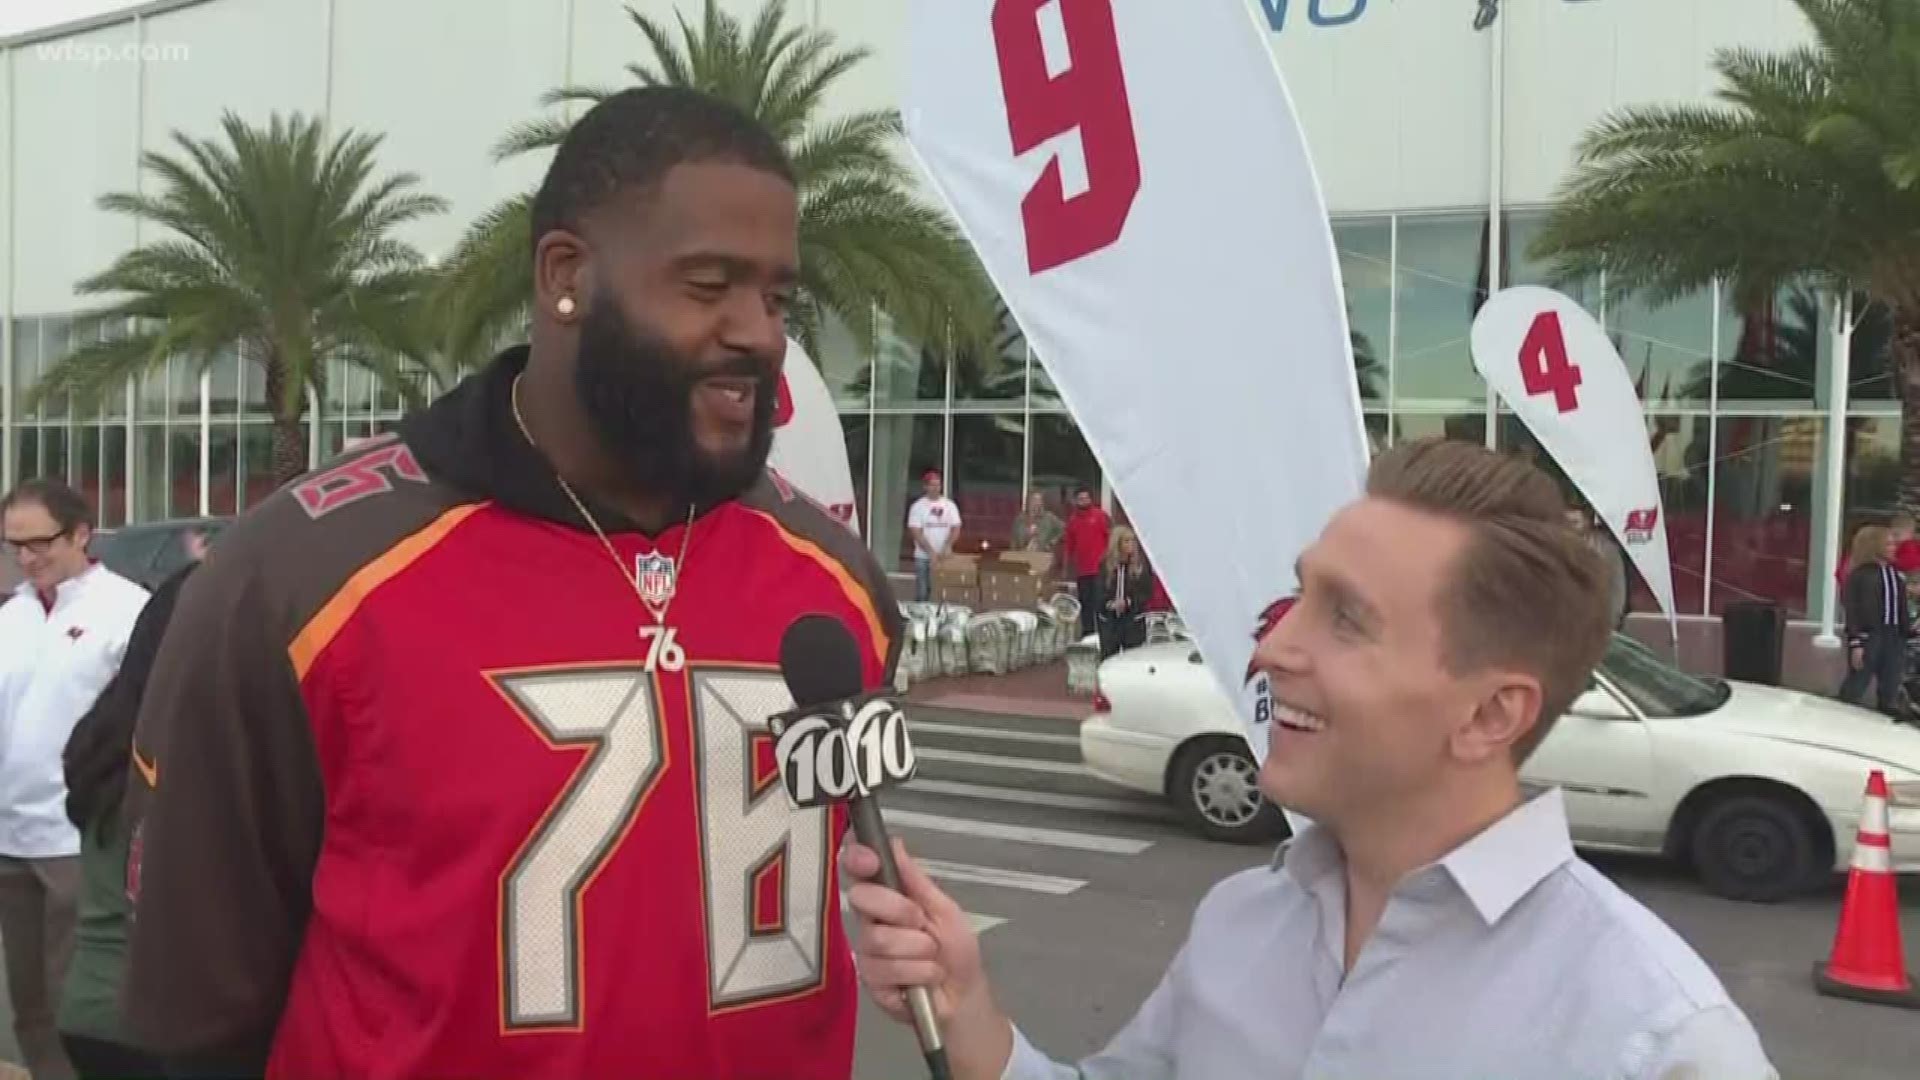 The Tampa Bay Buccaneers are continuing a long tradition of handing out turkeys and Thanksgiving essentials to 1,000 families in need